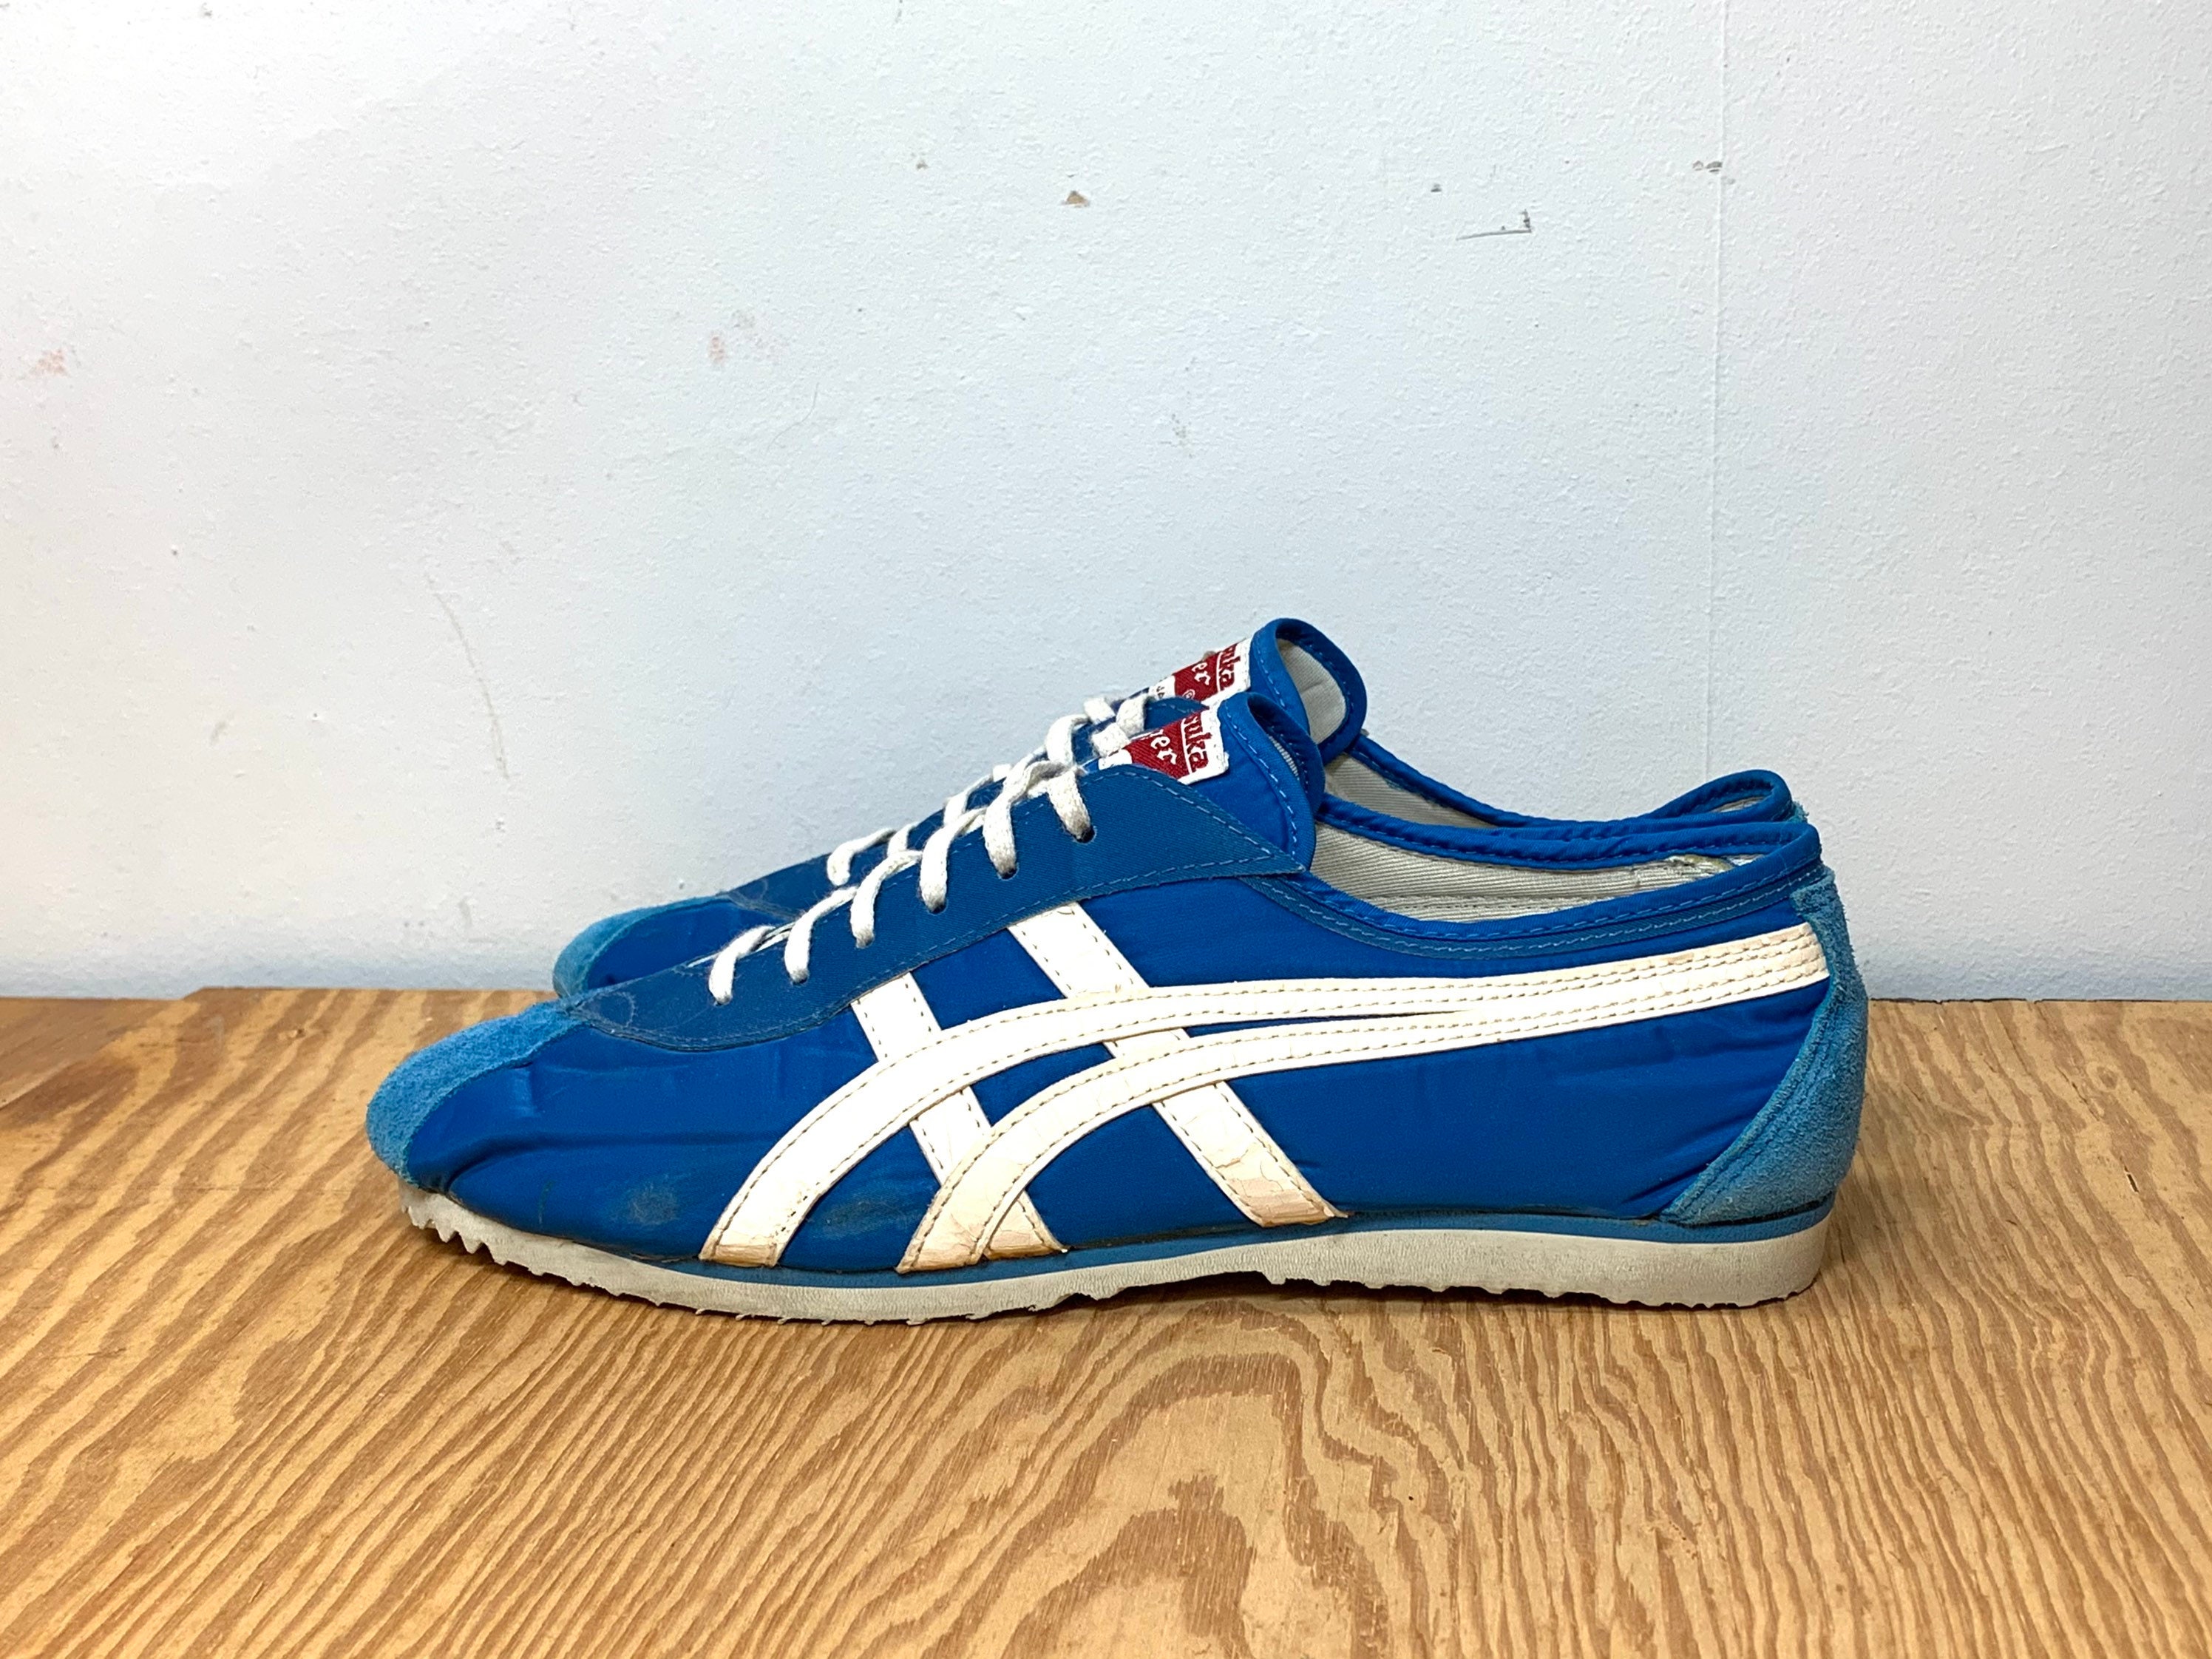 Receptor experimental inalámbrico 1960s 1970s Onitsuka Tiger Bostons Running Shoes Made in Japan - Etsy